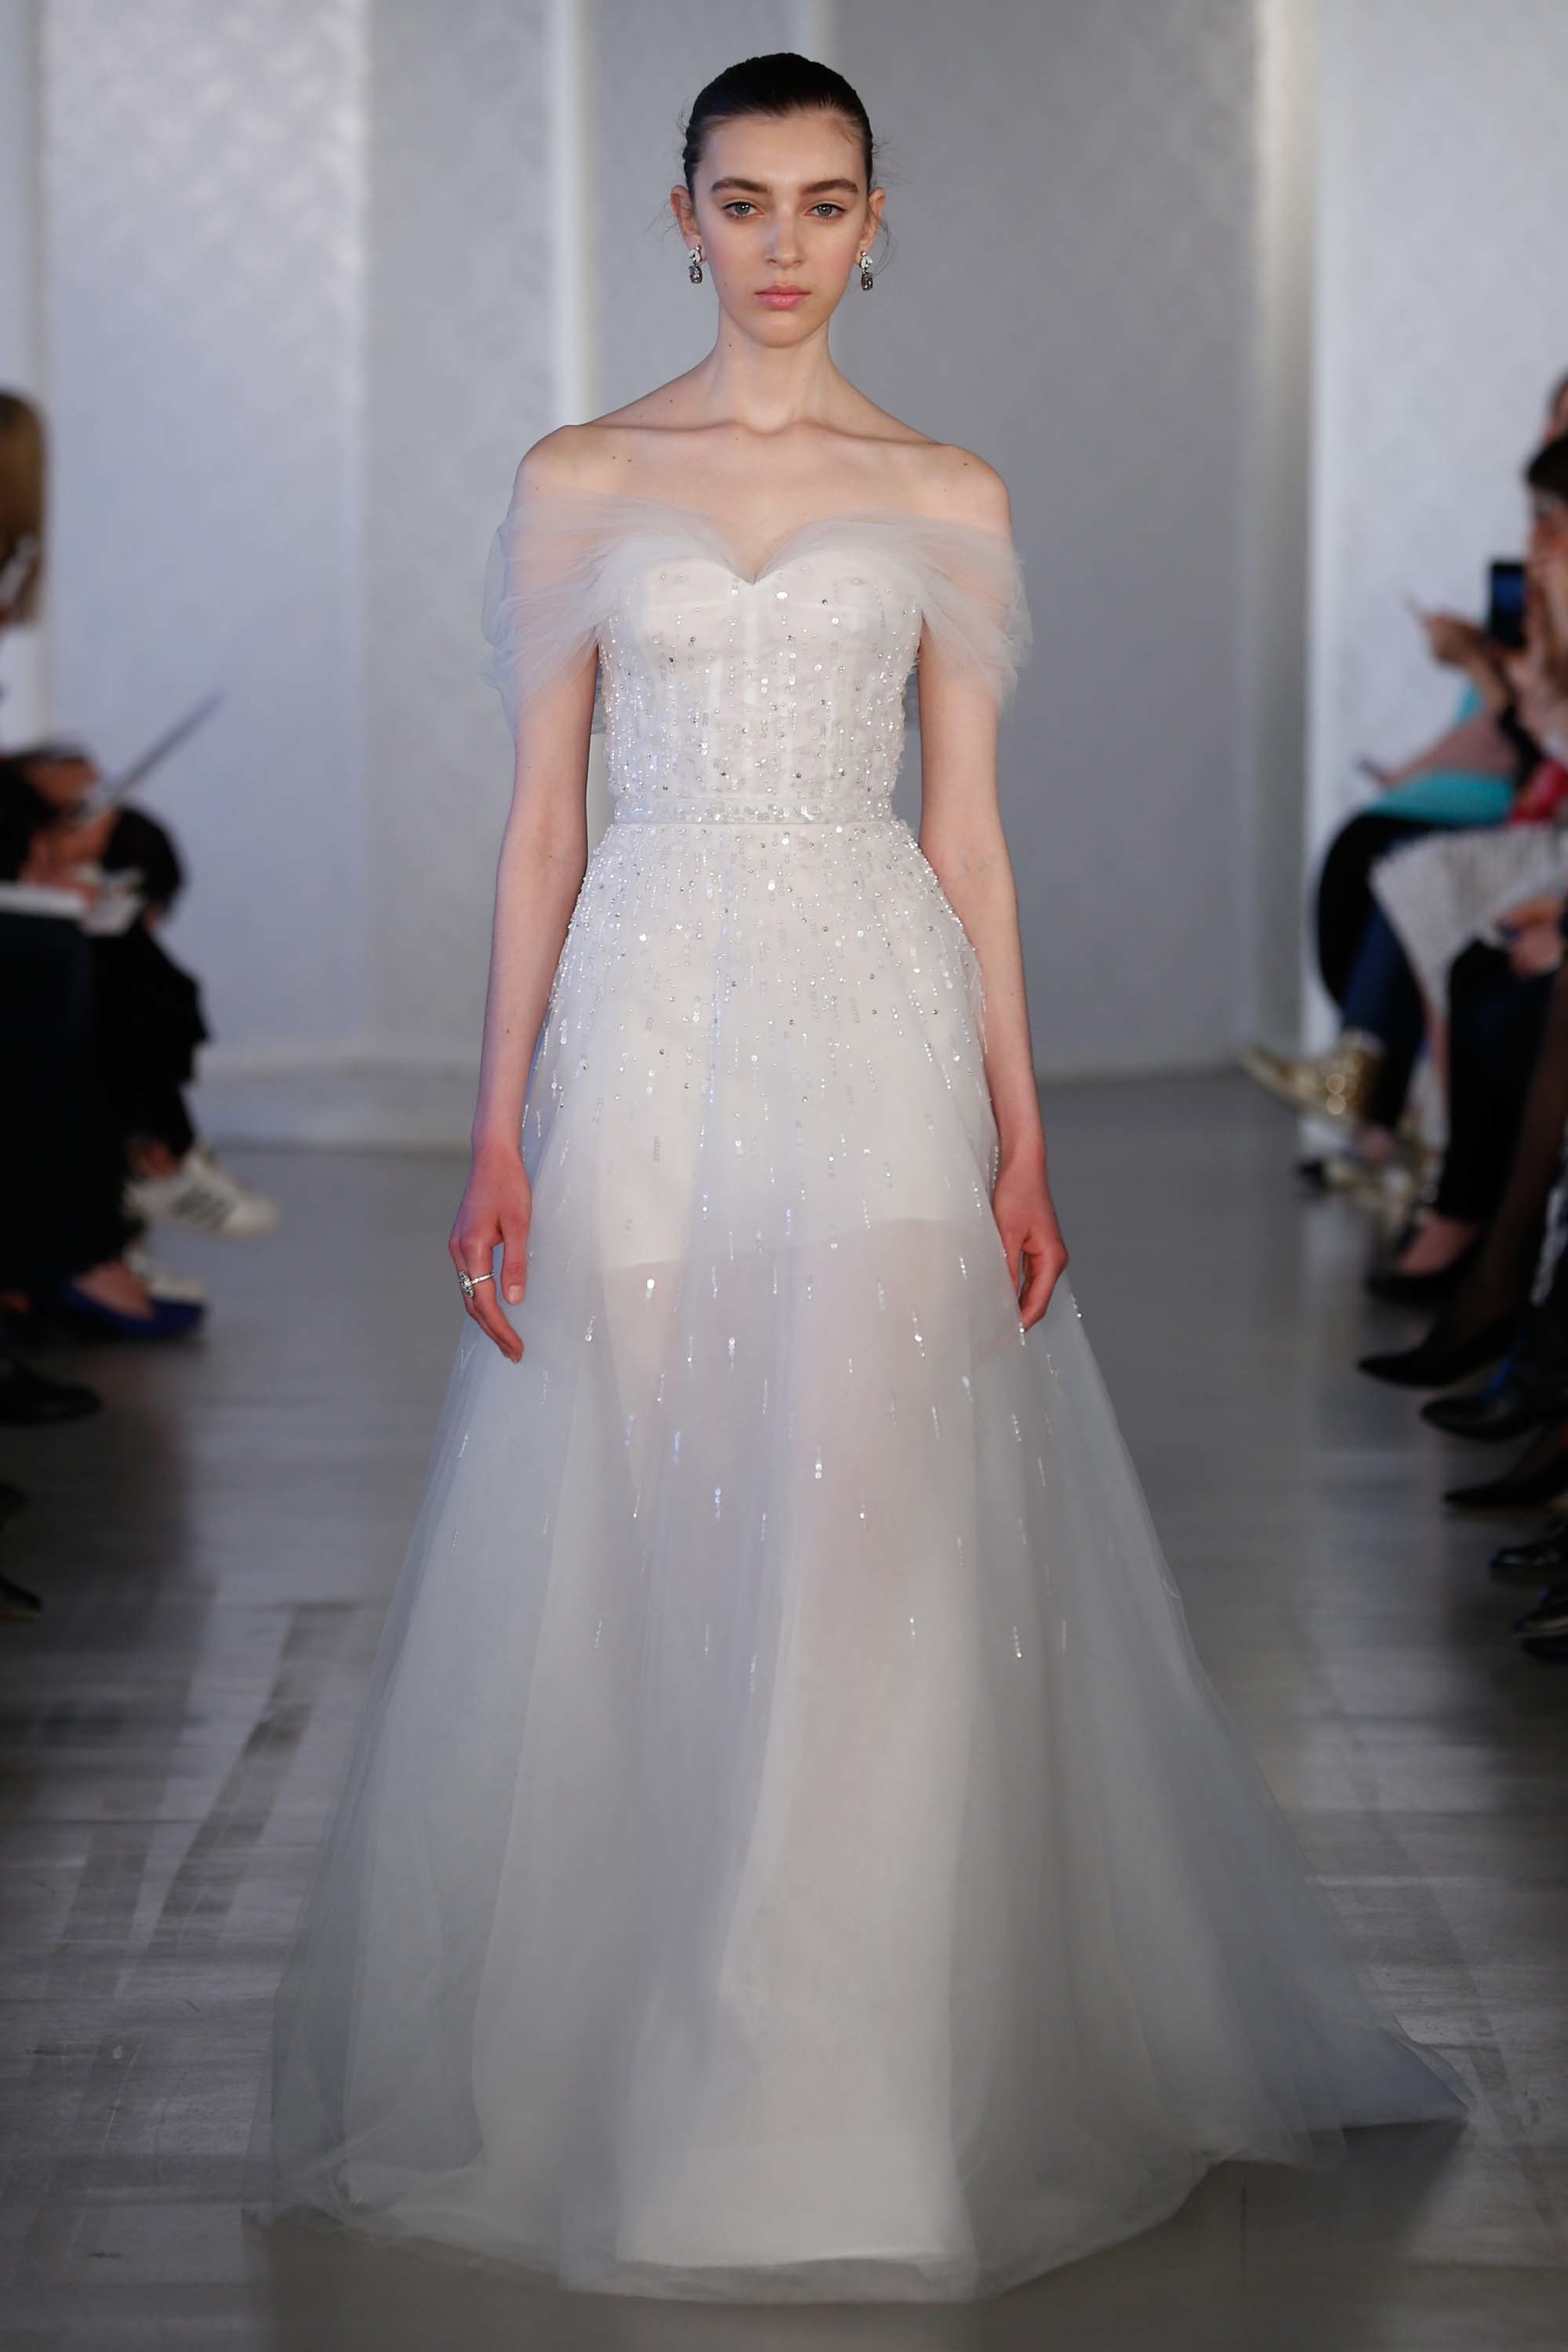 A wedding dress with open shoulders